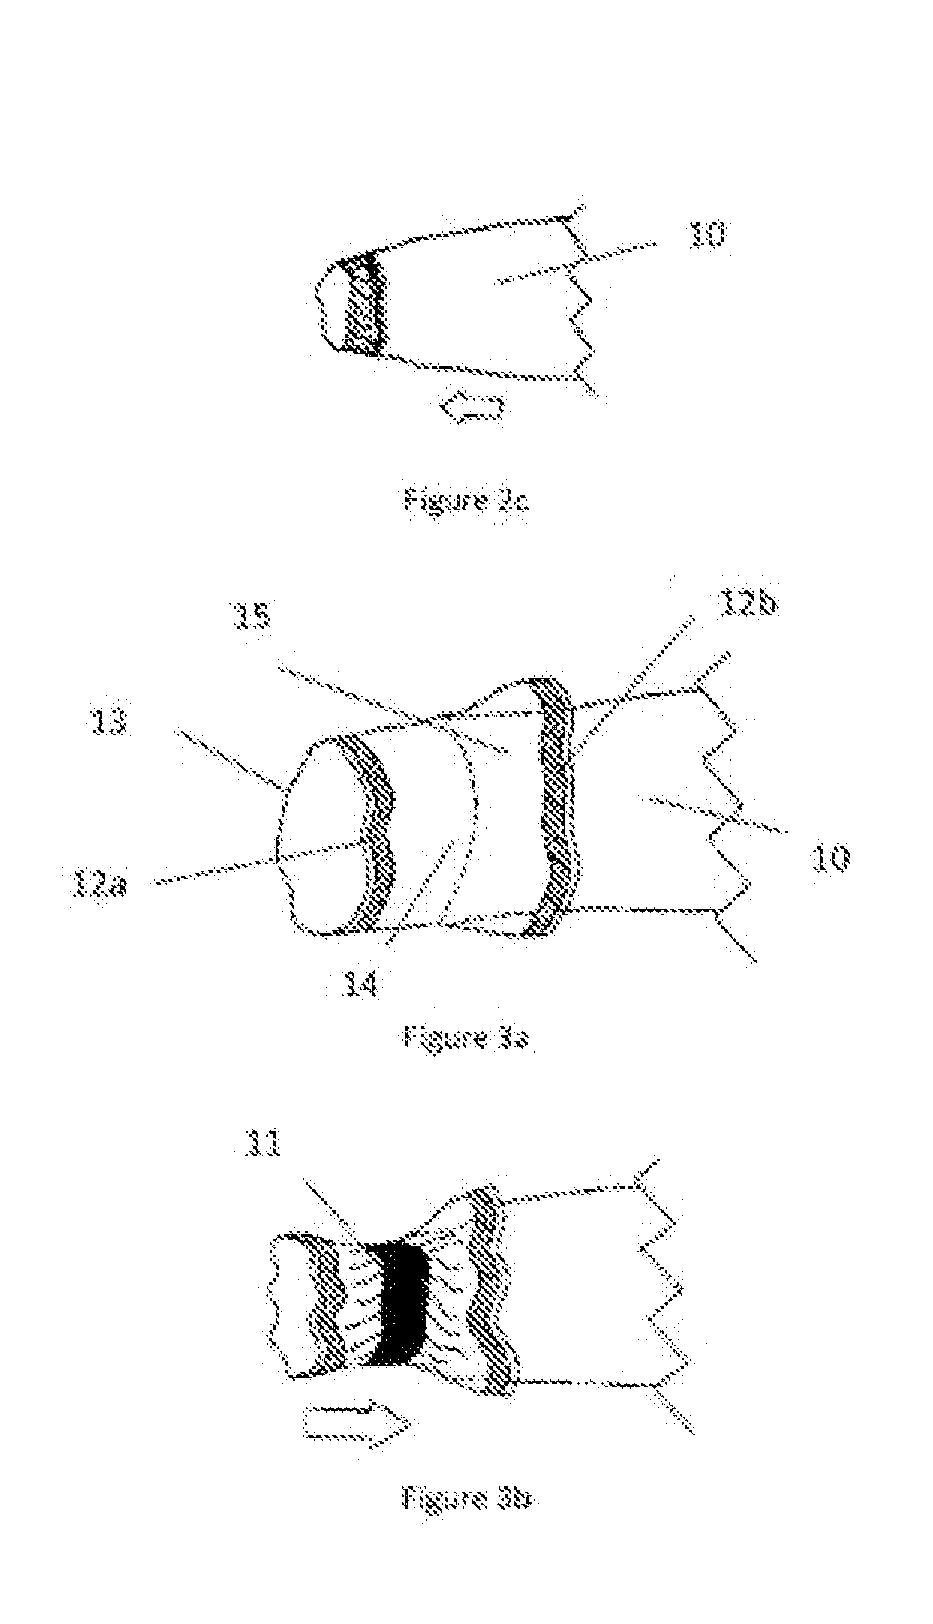 Electrostatic dissipative garment with interchangeable elastic bands